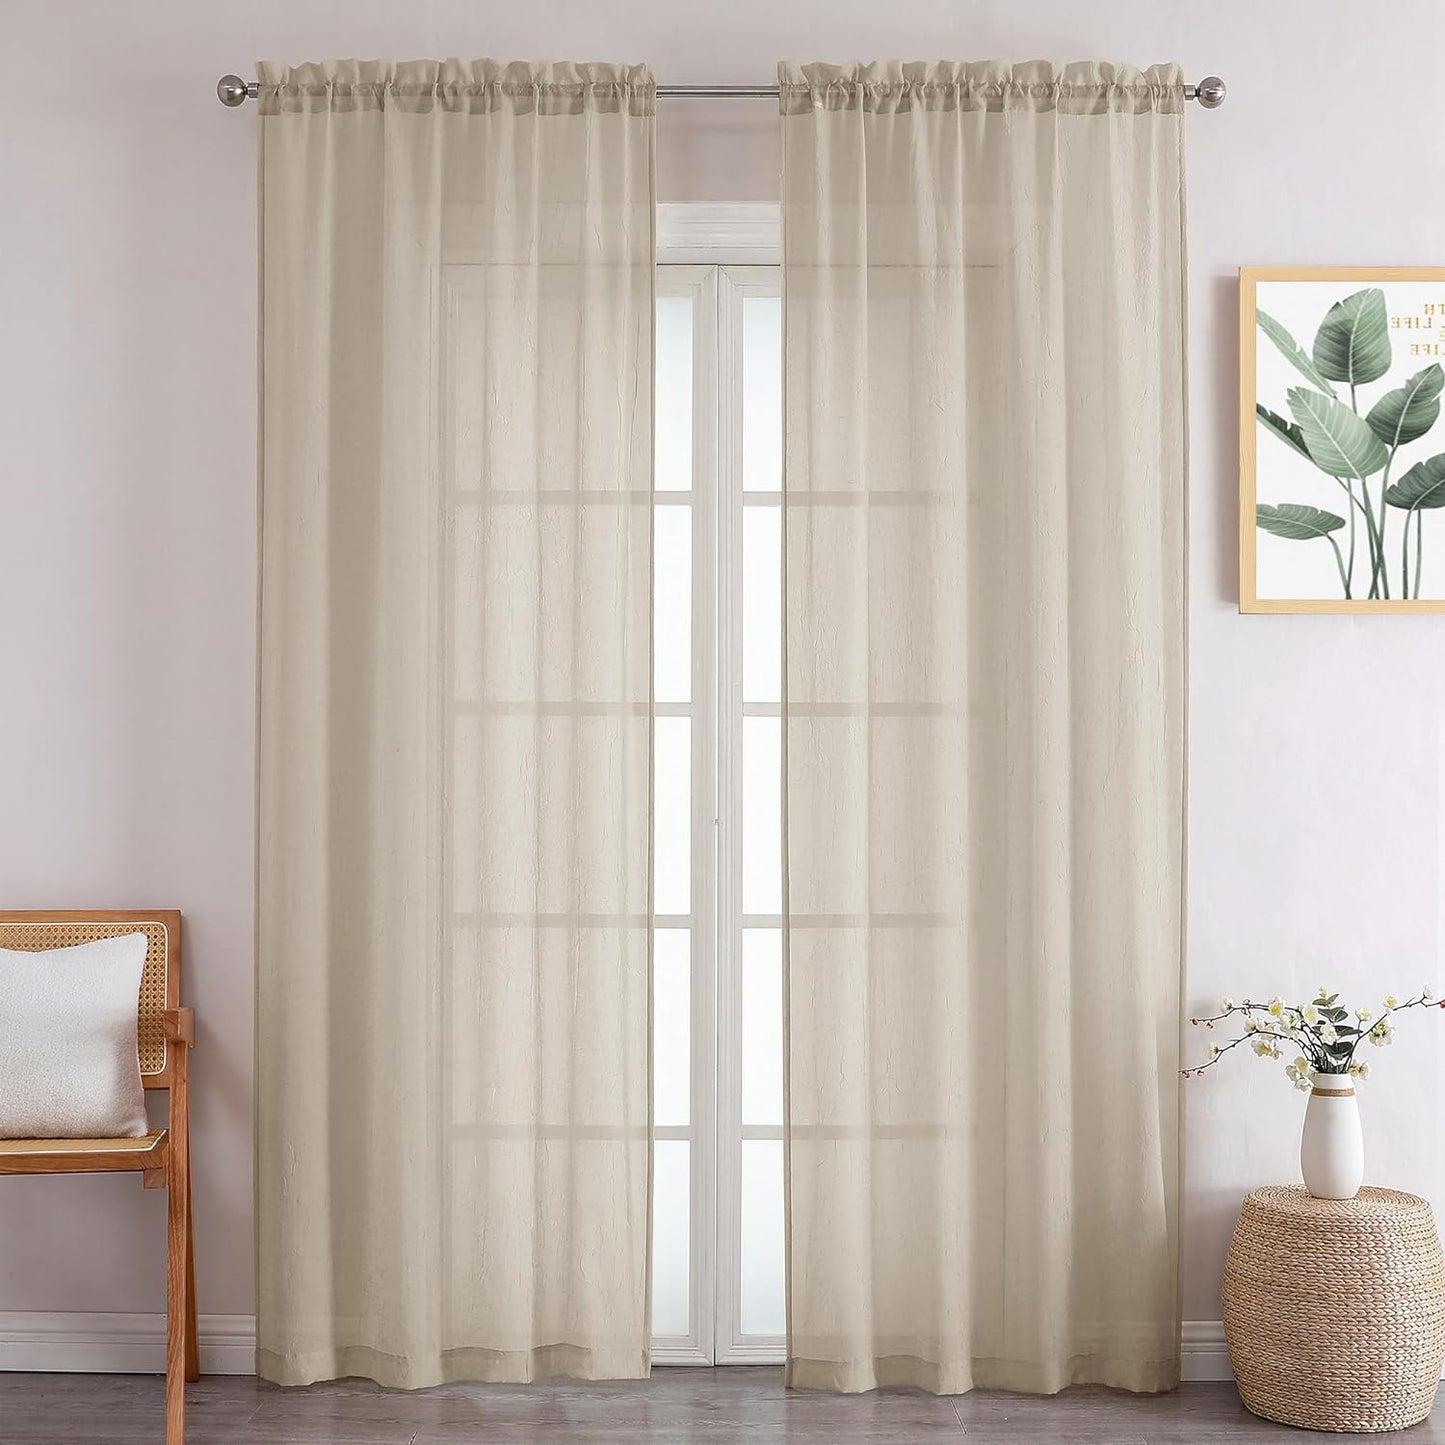 Crushed Sheer White Curtains 63 Inch Length 2 Panels, Light Filtering Solid Crinkle Voile Short Sheer Curtian for Bedroom Living Room, Each 42Wx63L Inches  Chyhomenyc Taupe 42 W X 96 L 